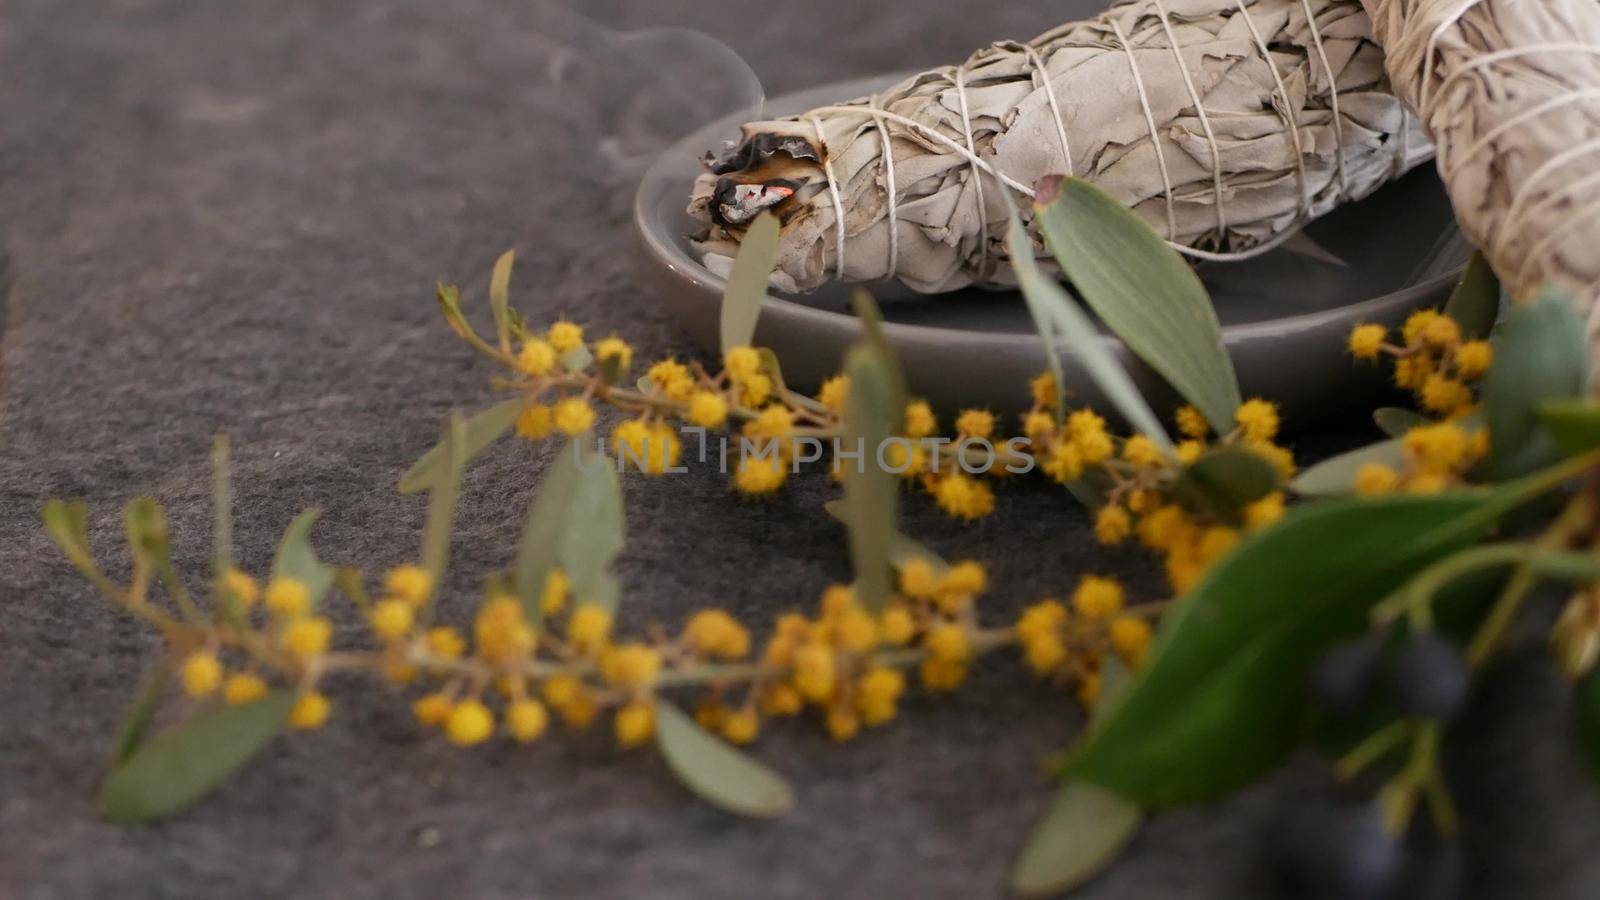 Dried white sage smudge stick, relaxation and aromatherapy. Smudging during psychic occult ceremony, herbal healing, yoga or aura cleaning. Essential incense for esoteric rituals and fortune telling.